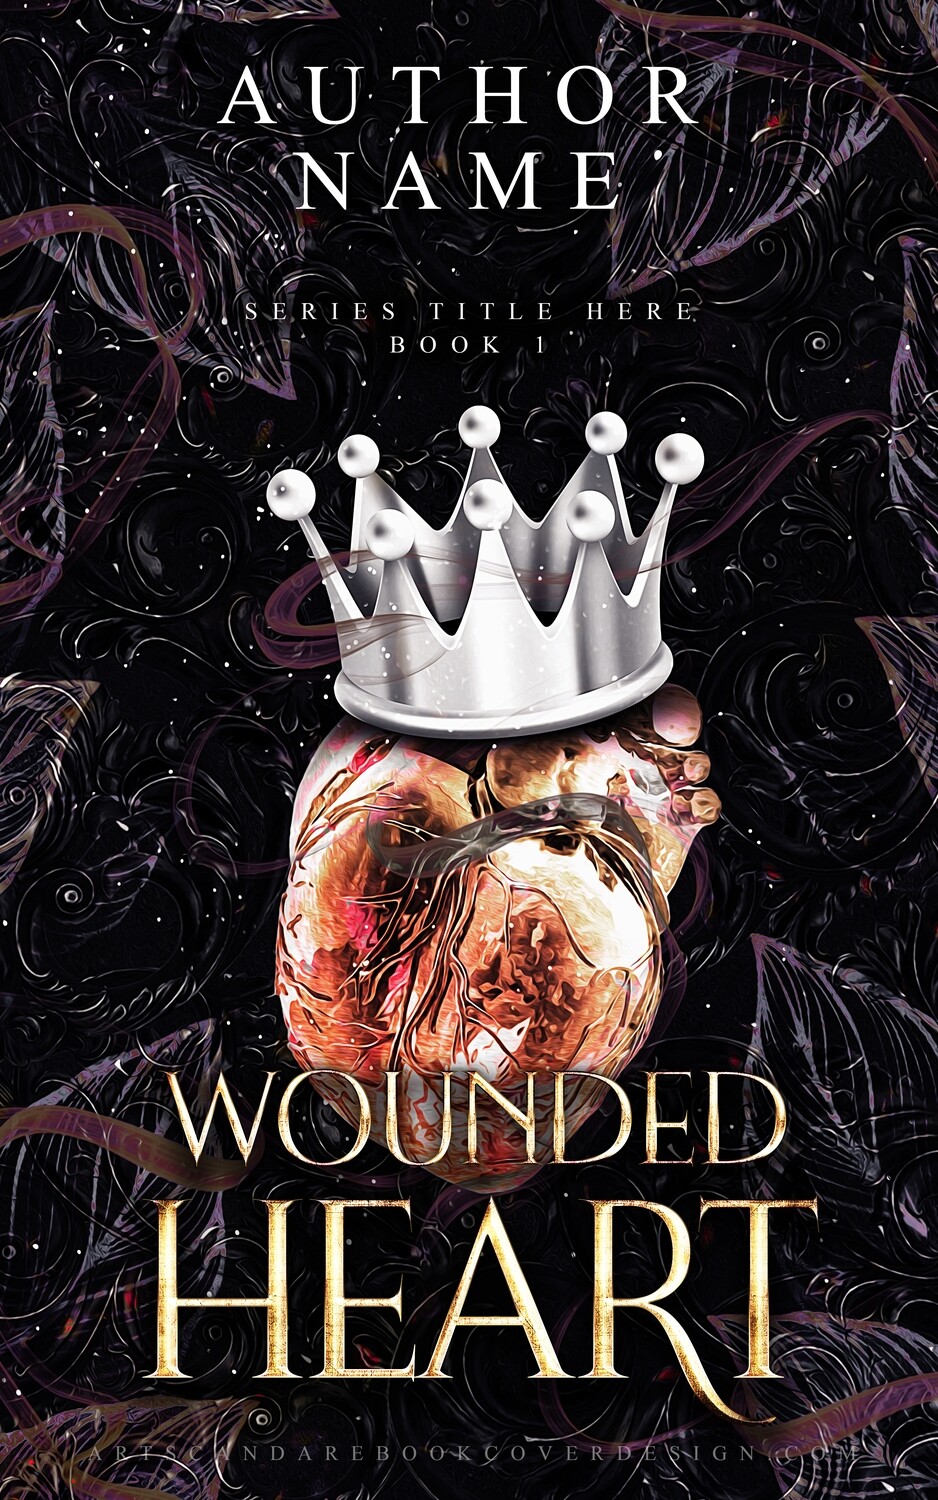 WOUNDED HEART